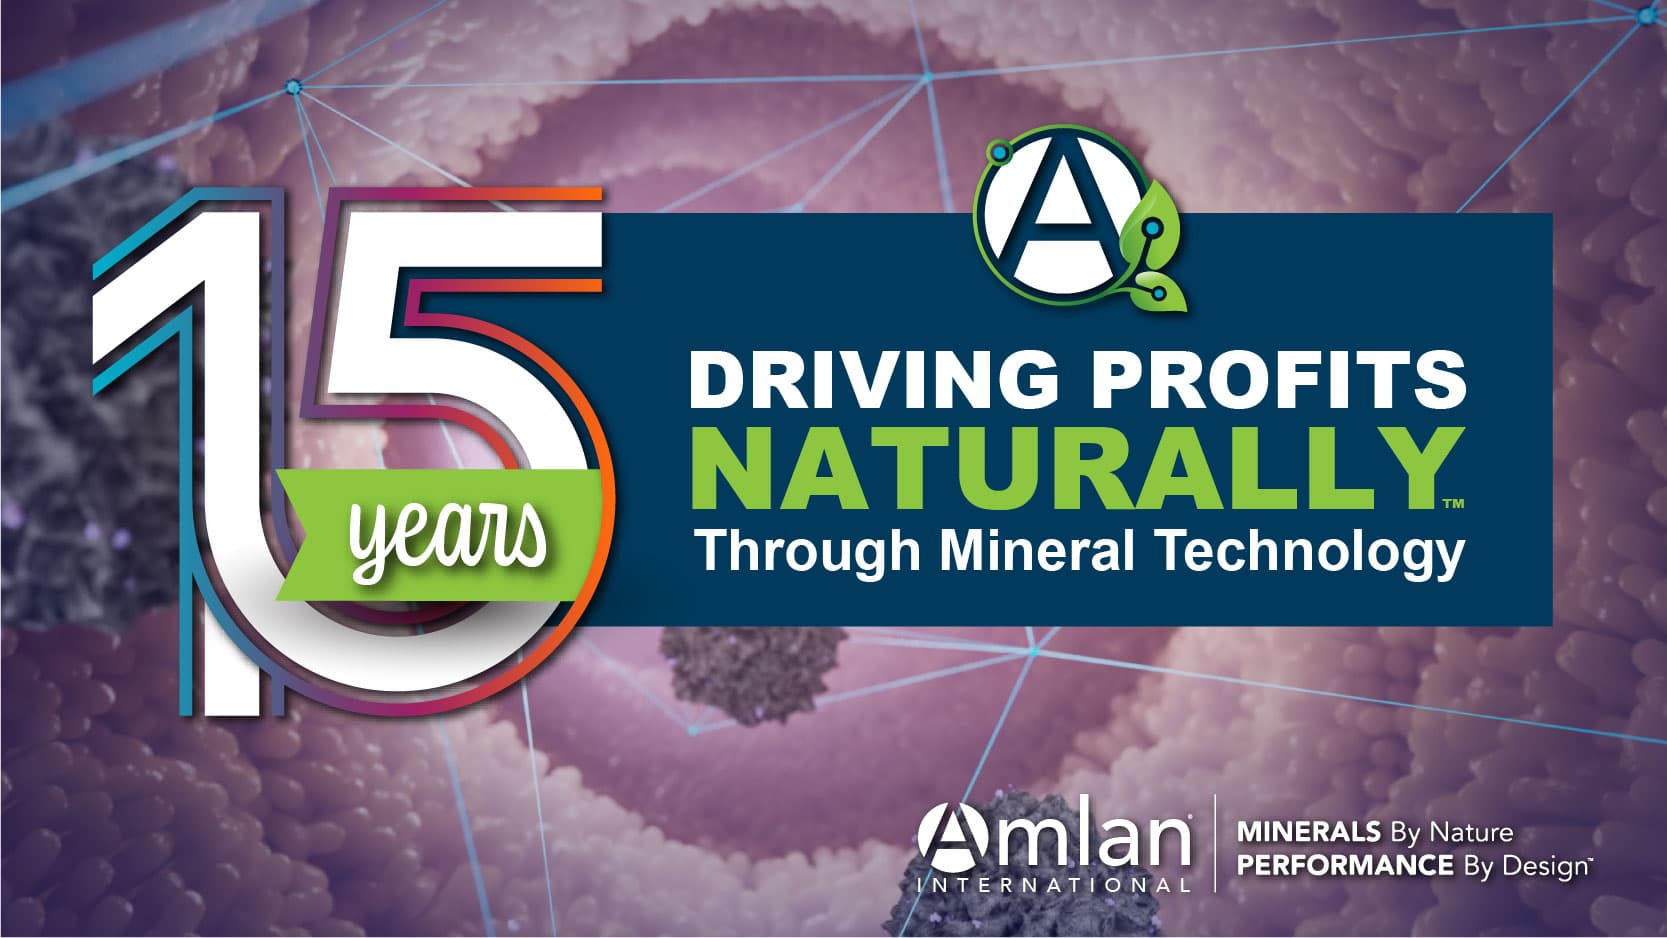 15 years driving profits naturally through mineral technology.